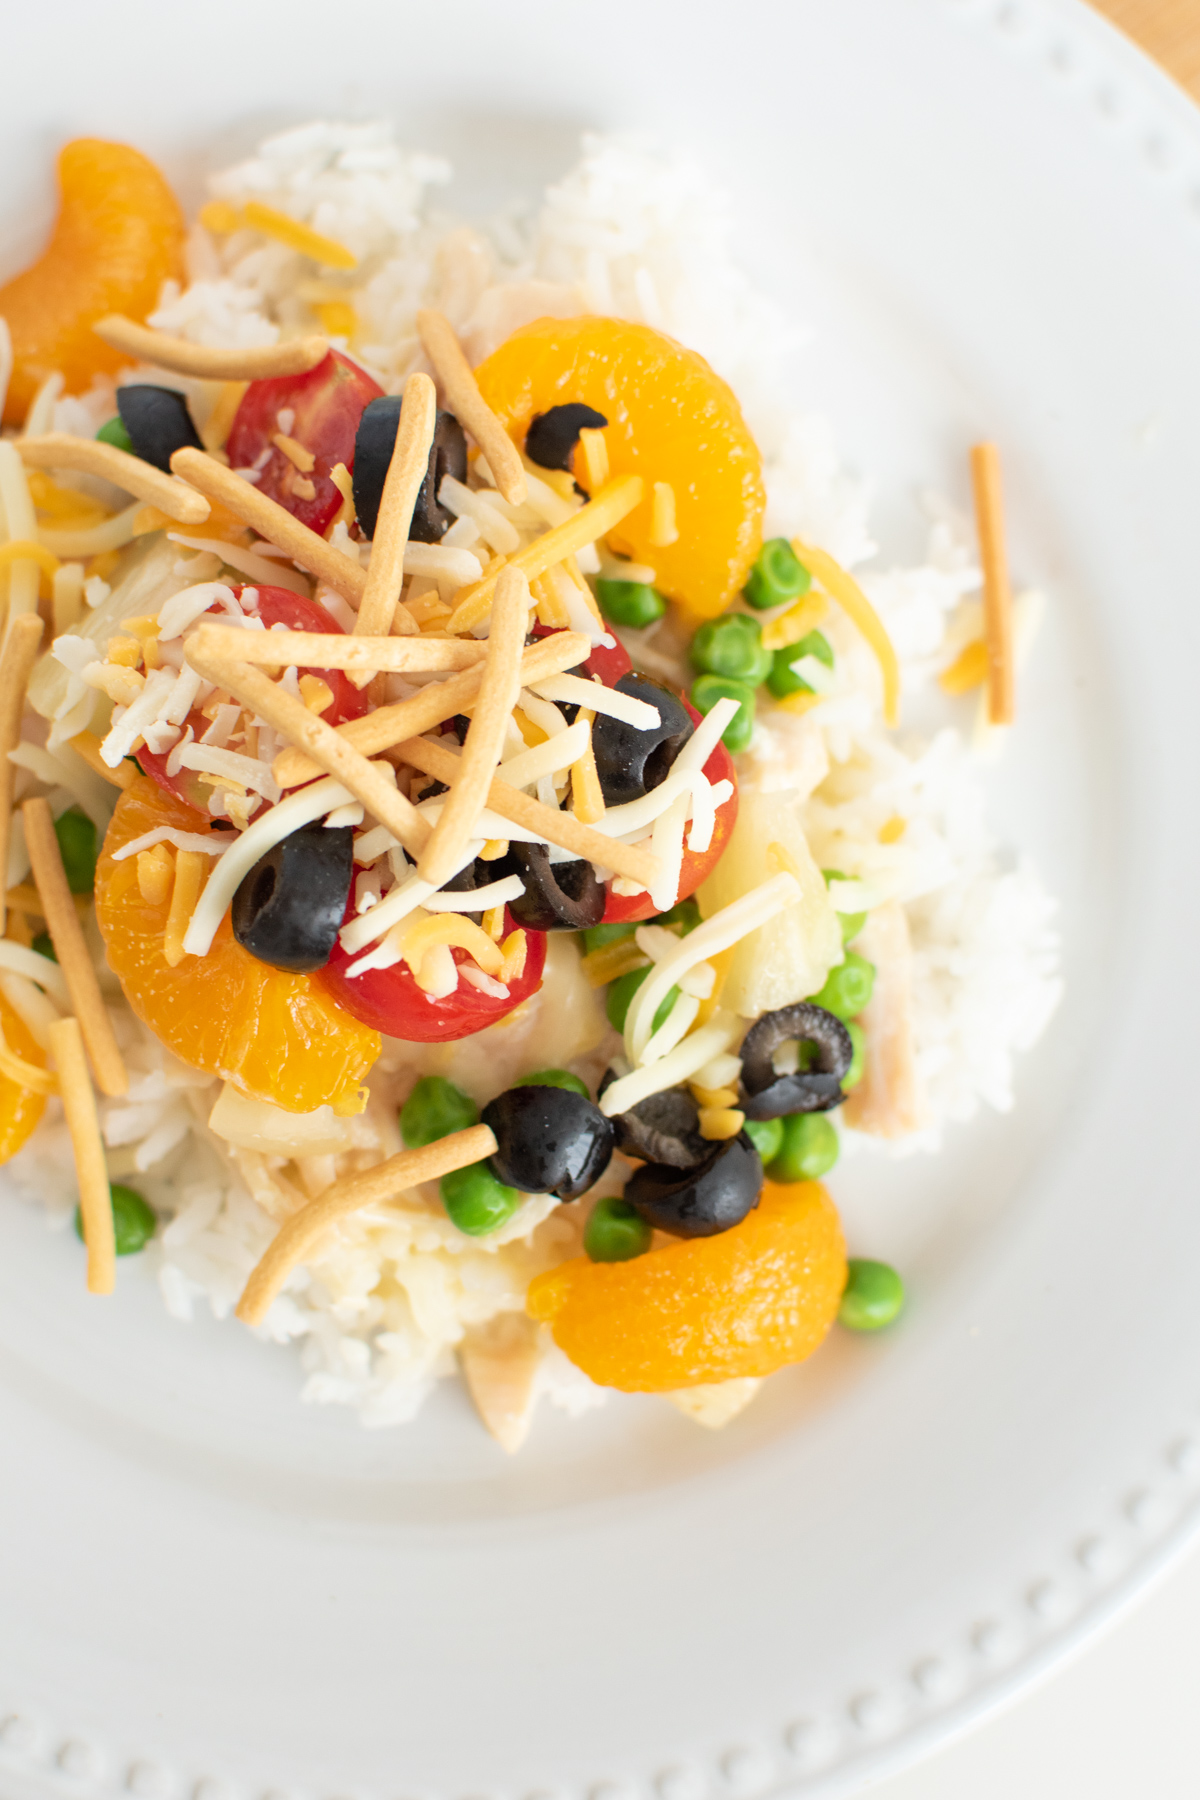 Hawaiian haystacks with sauce over rice with mandarin oranges, olives, peas and tomatoes.